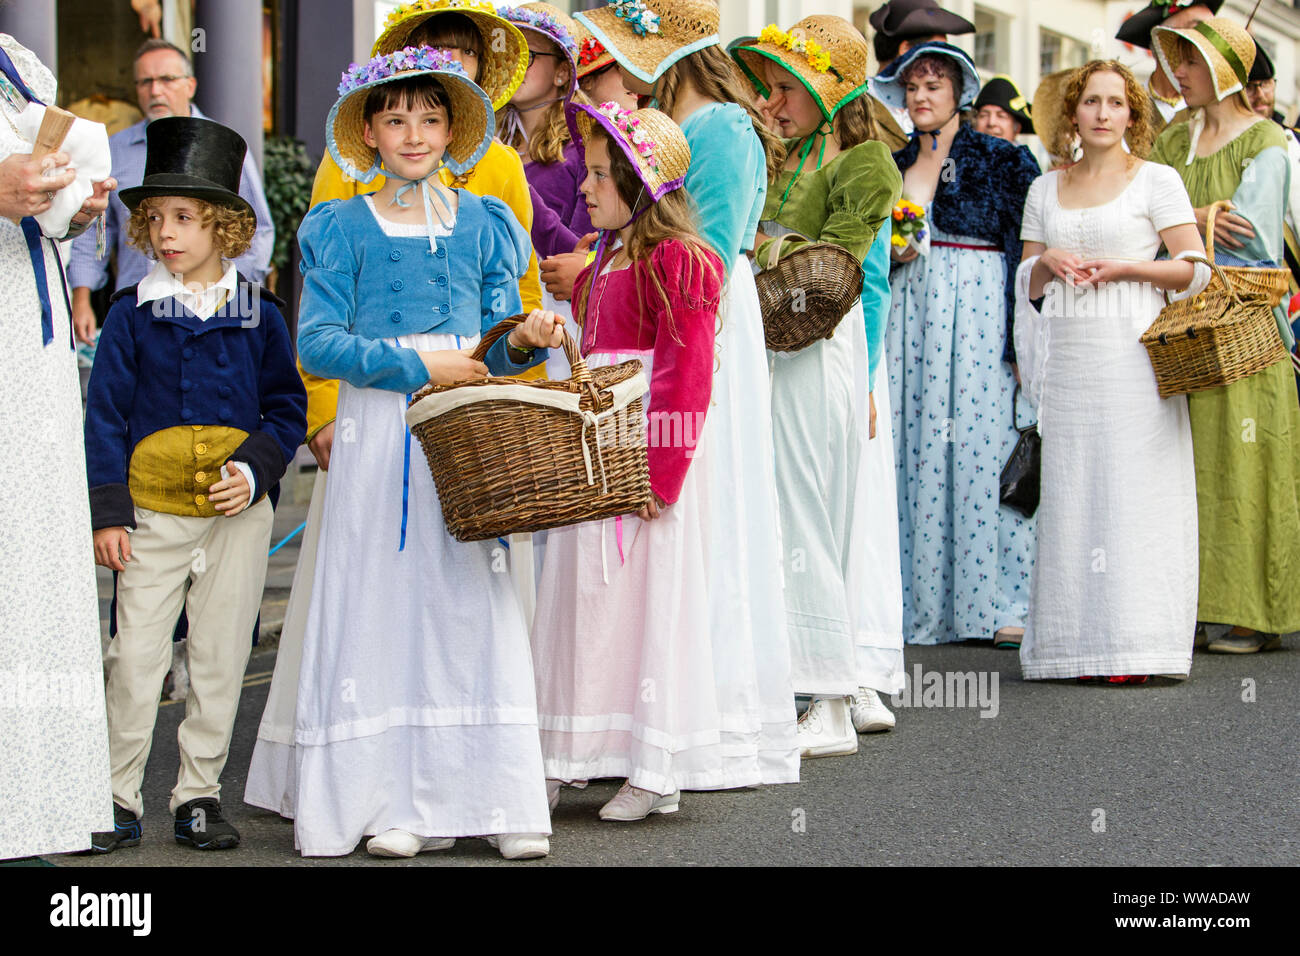 Bath, Somerset, UK. 14 Sep, 2019. Jane Austen fans are pictured taking part in the world famous Grand Regency Costumed Promenade. The Promenade, part of the 10 day Jane Austen Festival is a procession through the streets of Bath and the participants who come from all over the world dress in 18th Century costume. Credit:  Lynchpics/Alamy Live News Stock Photo